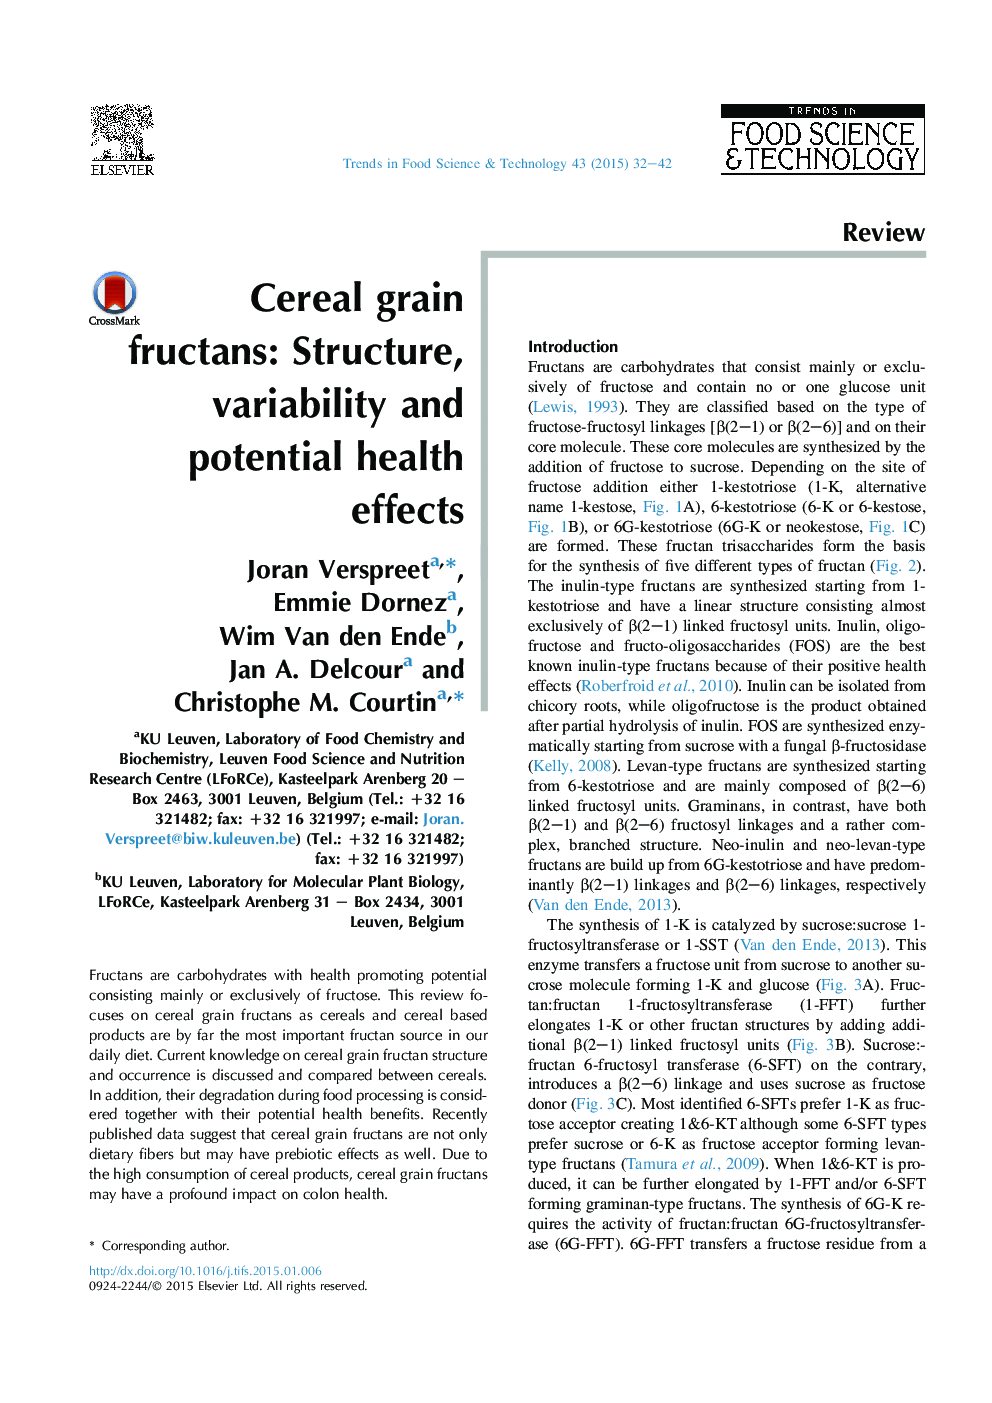 Cereal grain fructans: Structure, variability and potential health effects